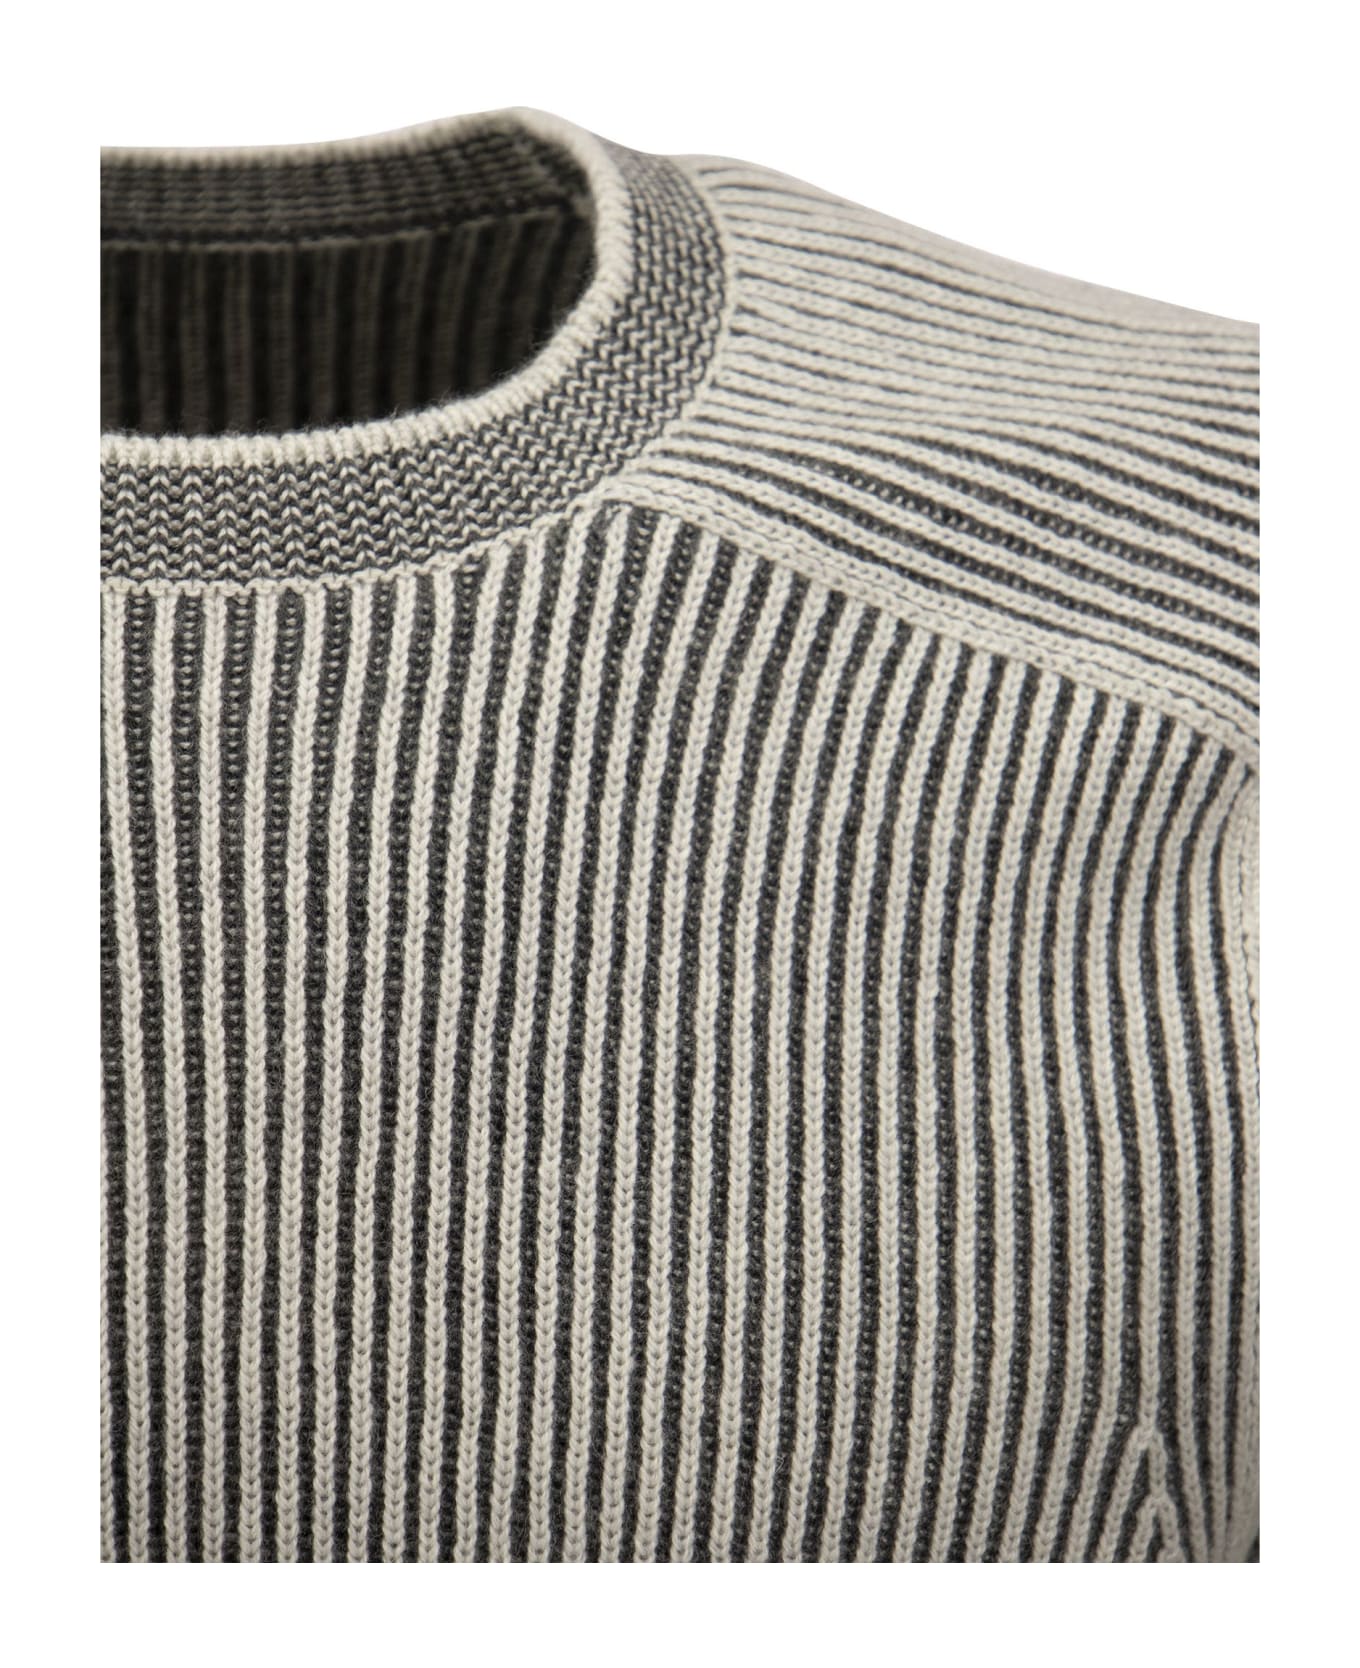 Sease Dinghy - Ribbed Cashmere Reversible Crew Neck Sweater - White